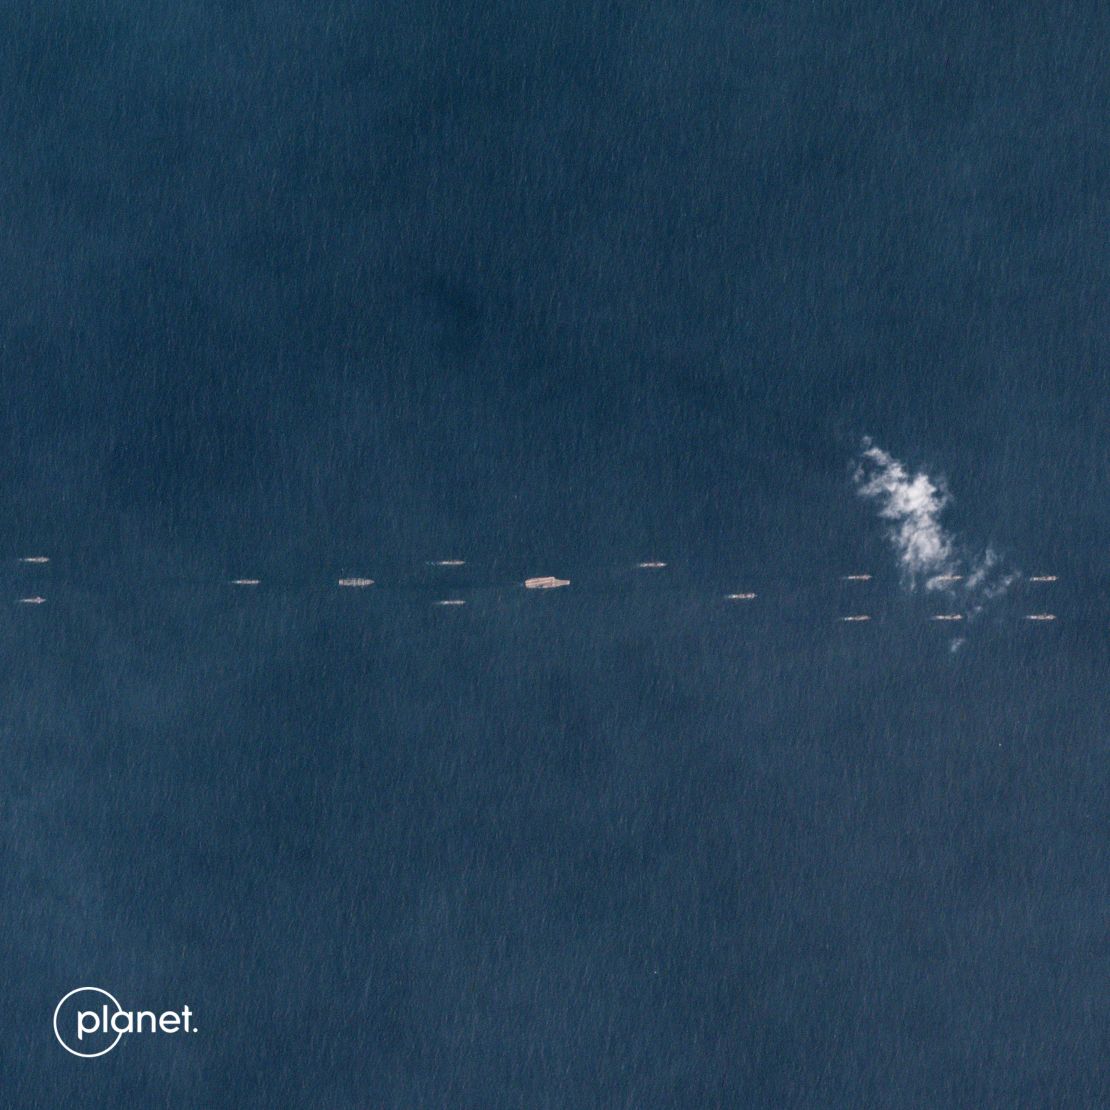 Satellite images from Planet Labs show the Liaoning aircraft carrier with a fleet of PLA Navy vessels, experts say